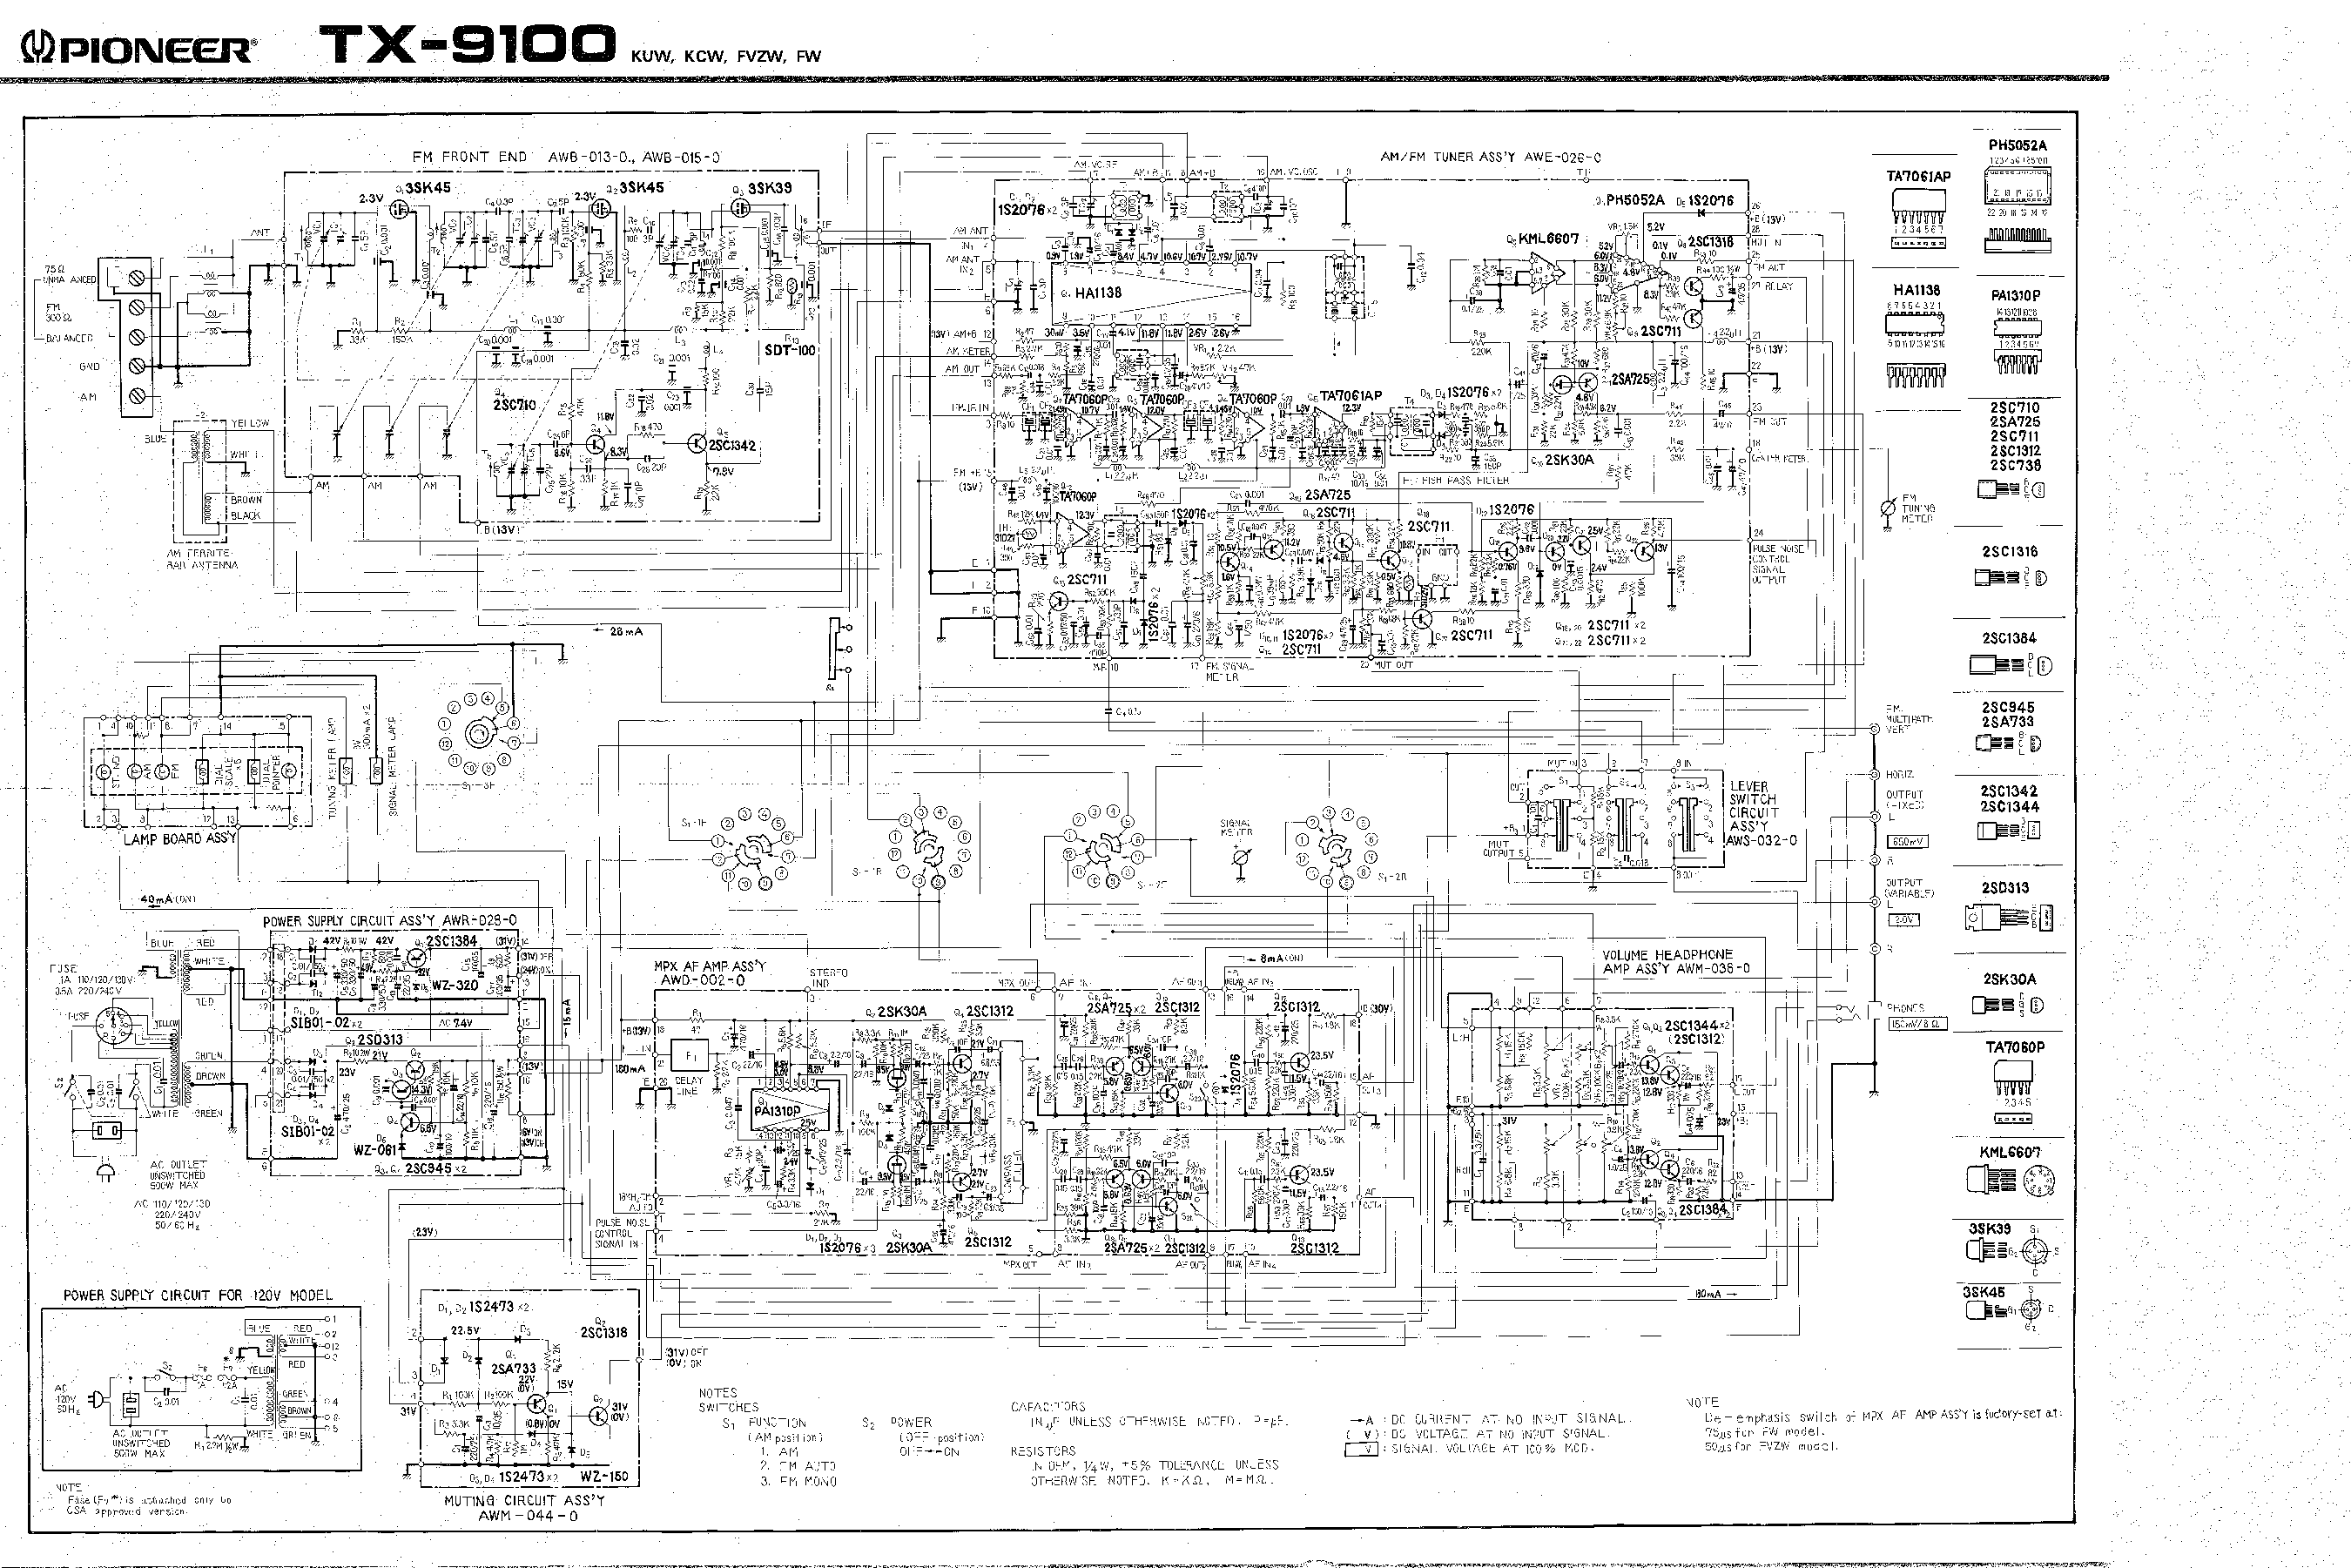 PIONEER TX-9100 SCH 2 service manual (1st page)